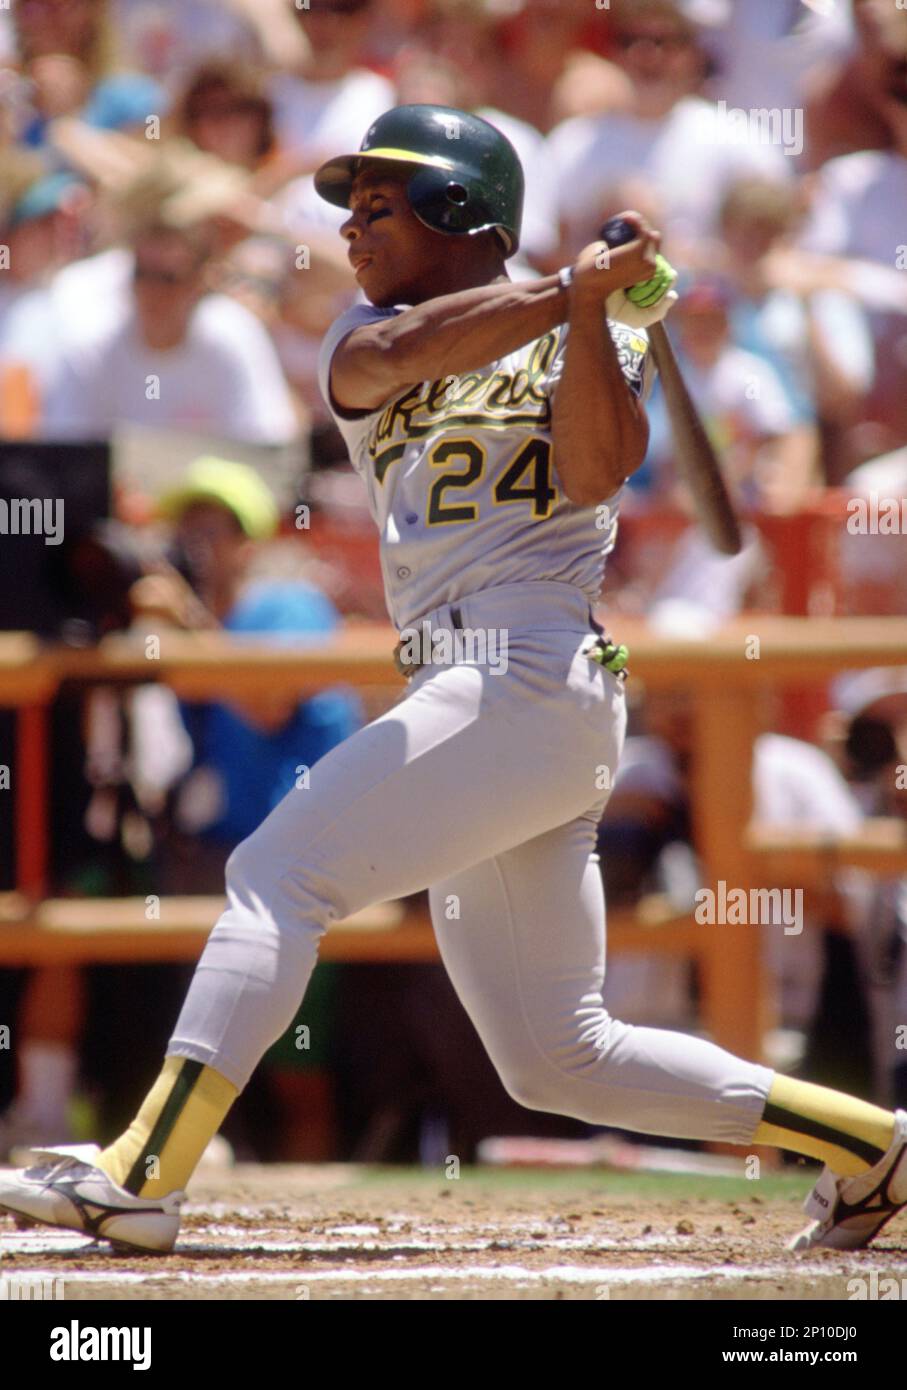 Oakland A's Rickey Henderson (24) during a game from his career with the  Oakland A's. Rickey Henderson played for 25 years with 9 different teams  and was inducted to the Baseball Hall